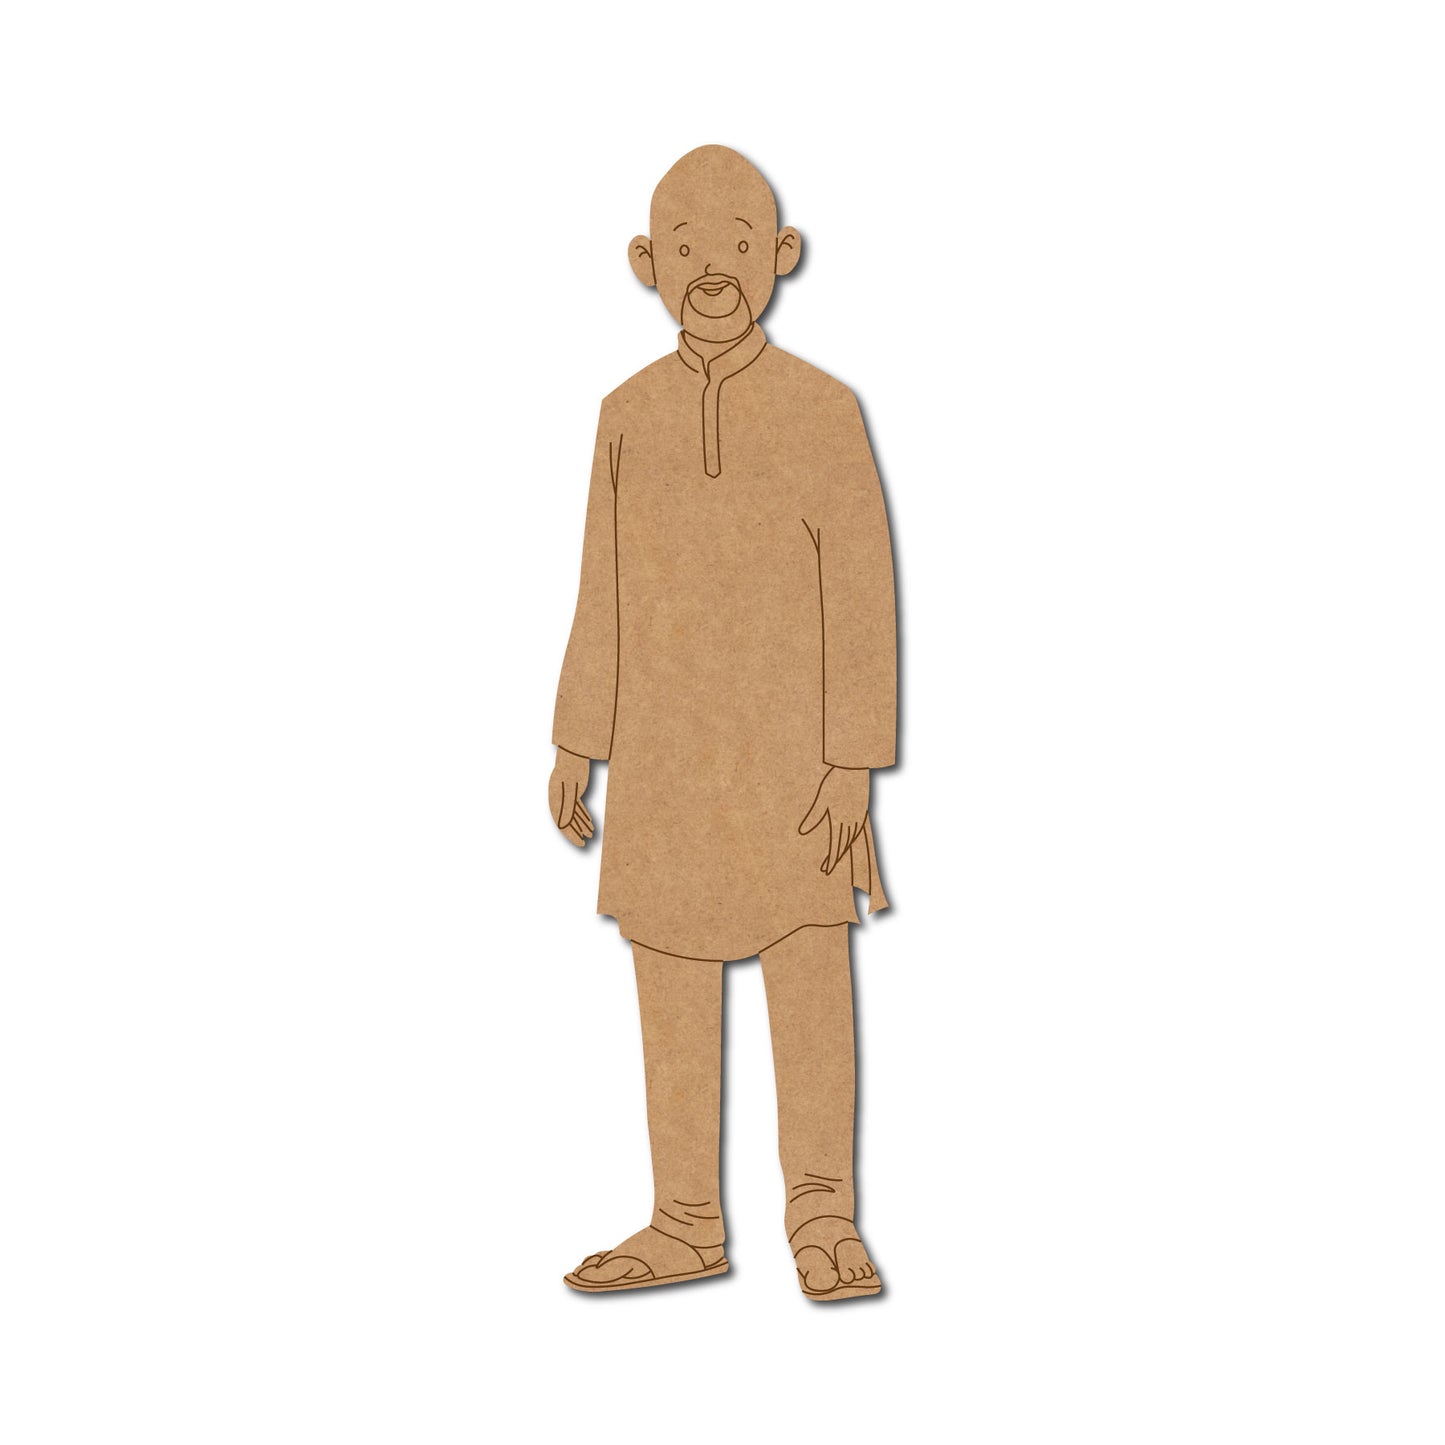 Bald Man With Beard Pre Marked MDF Design 1